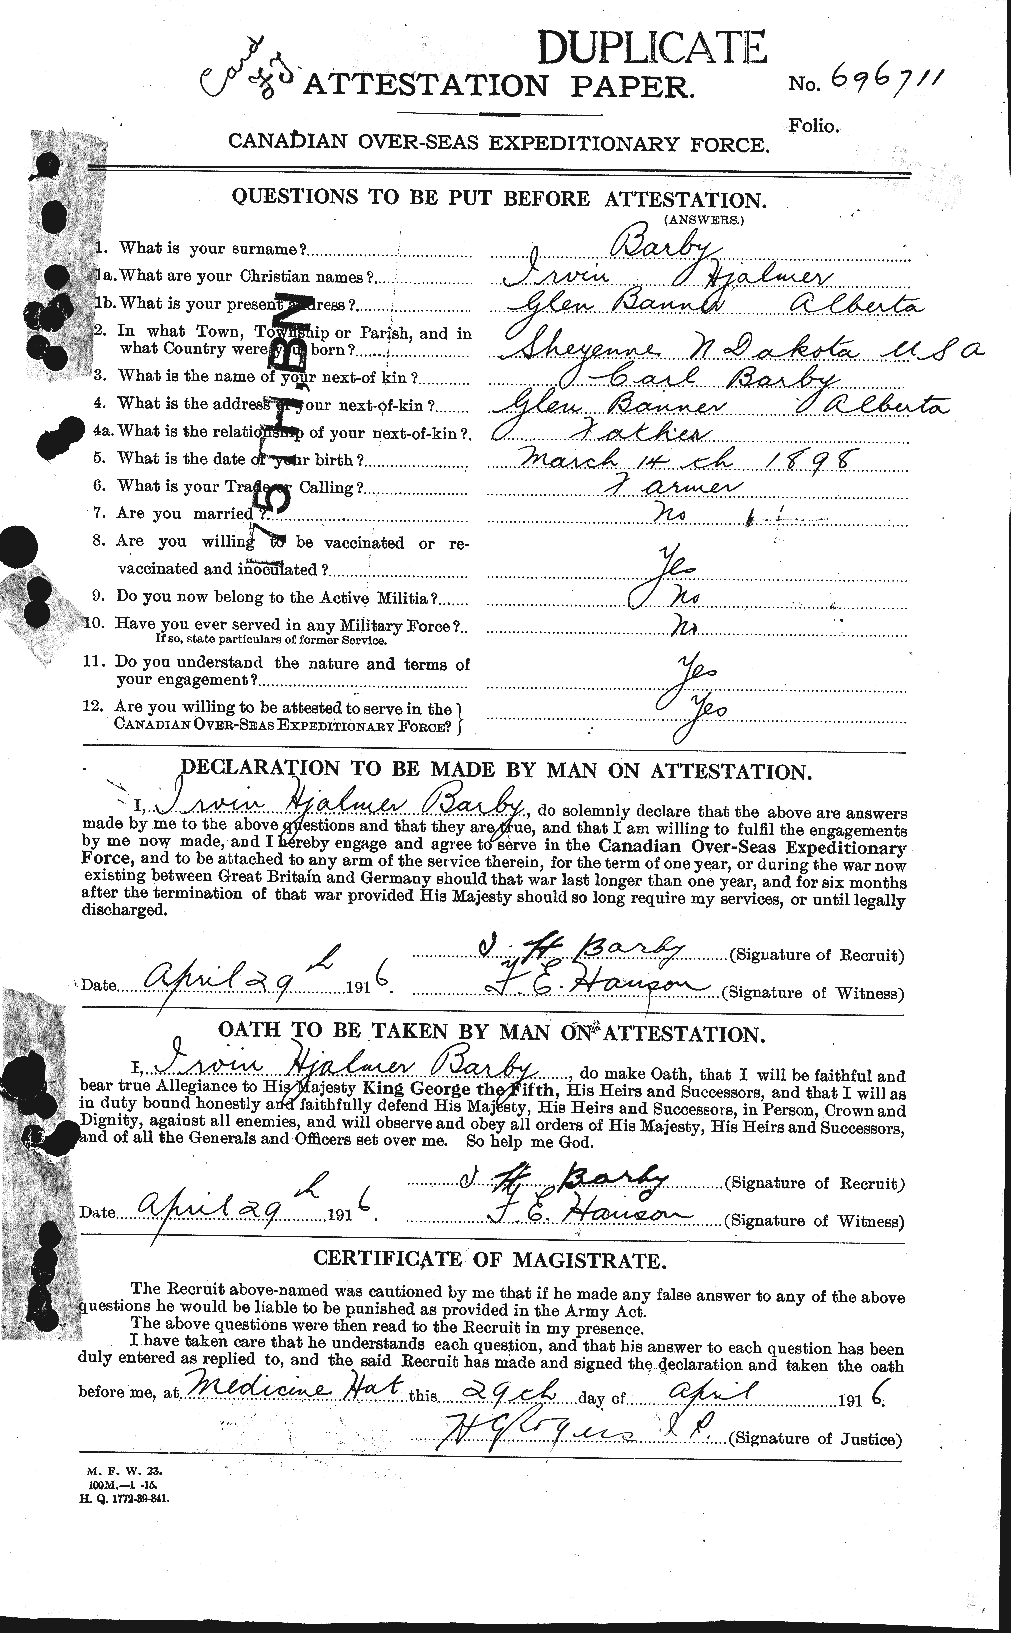 Personnel Records of the First World War - CEF 220989a